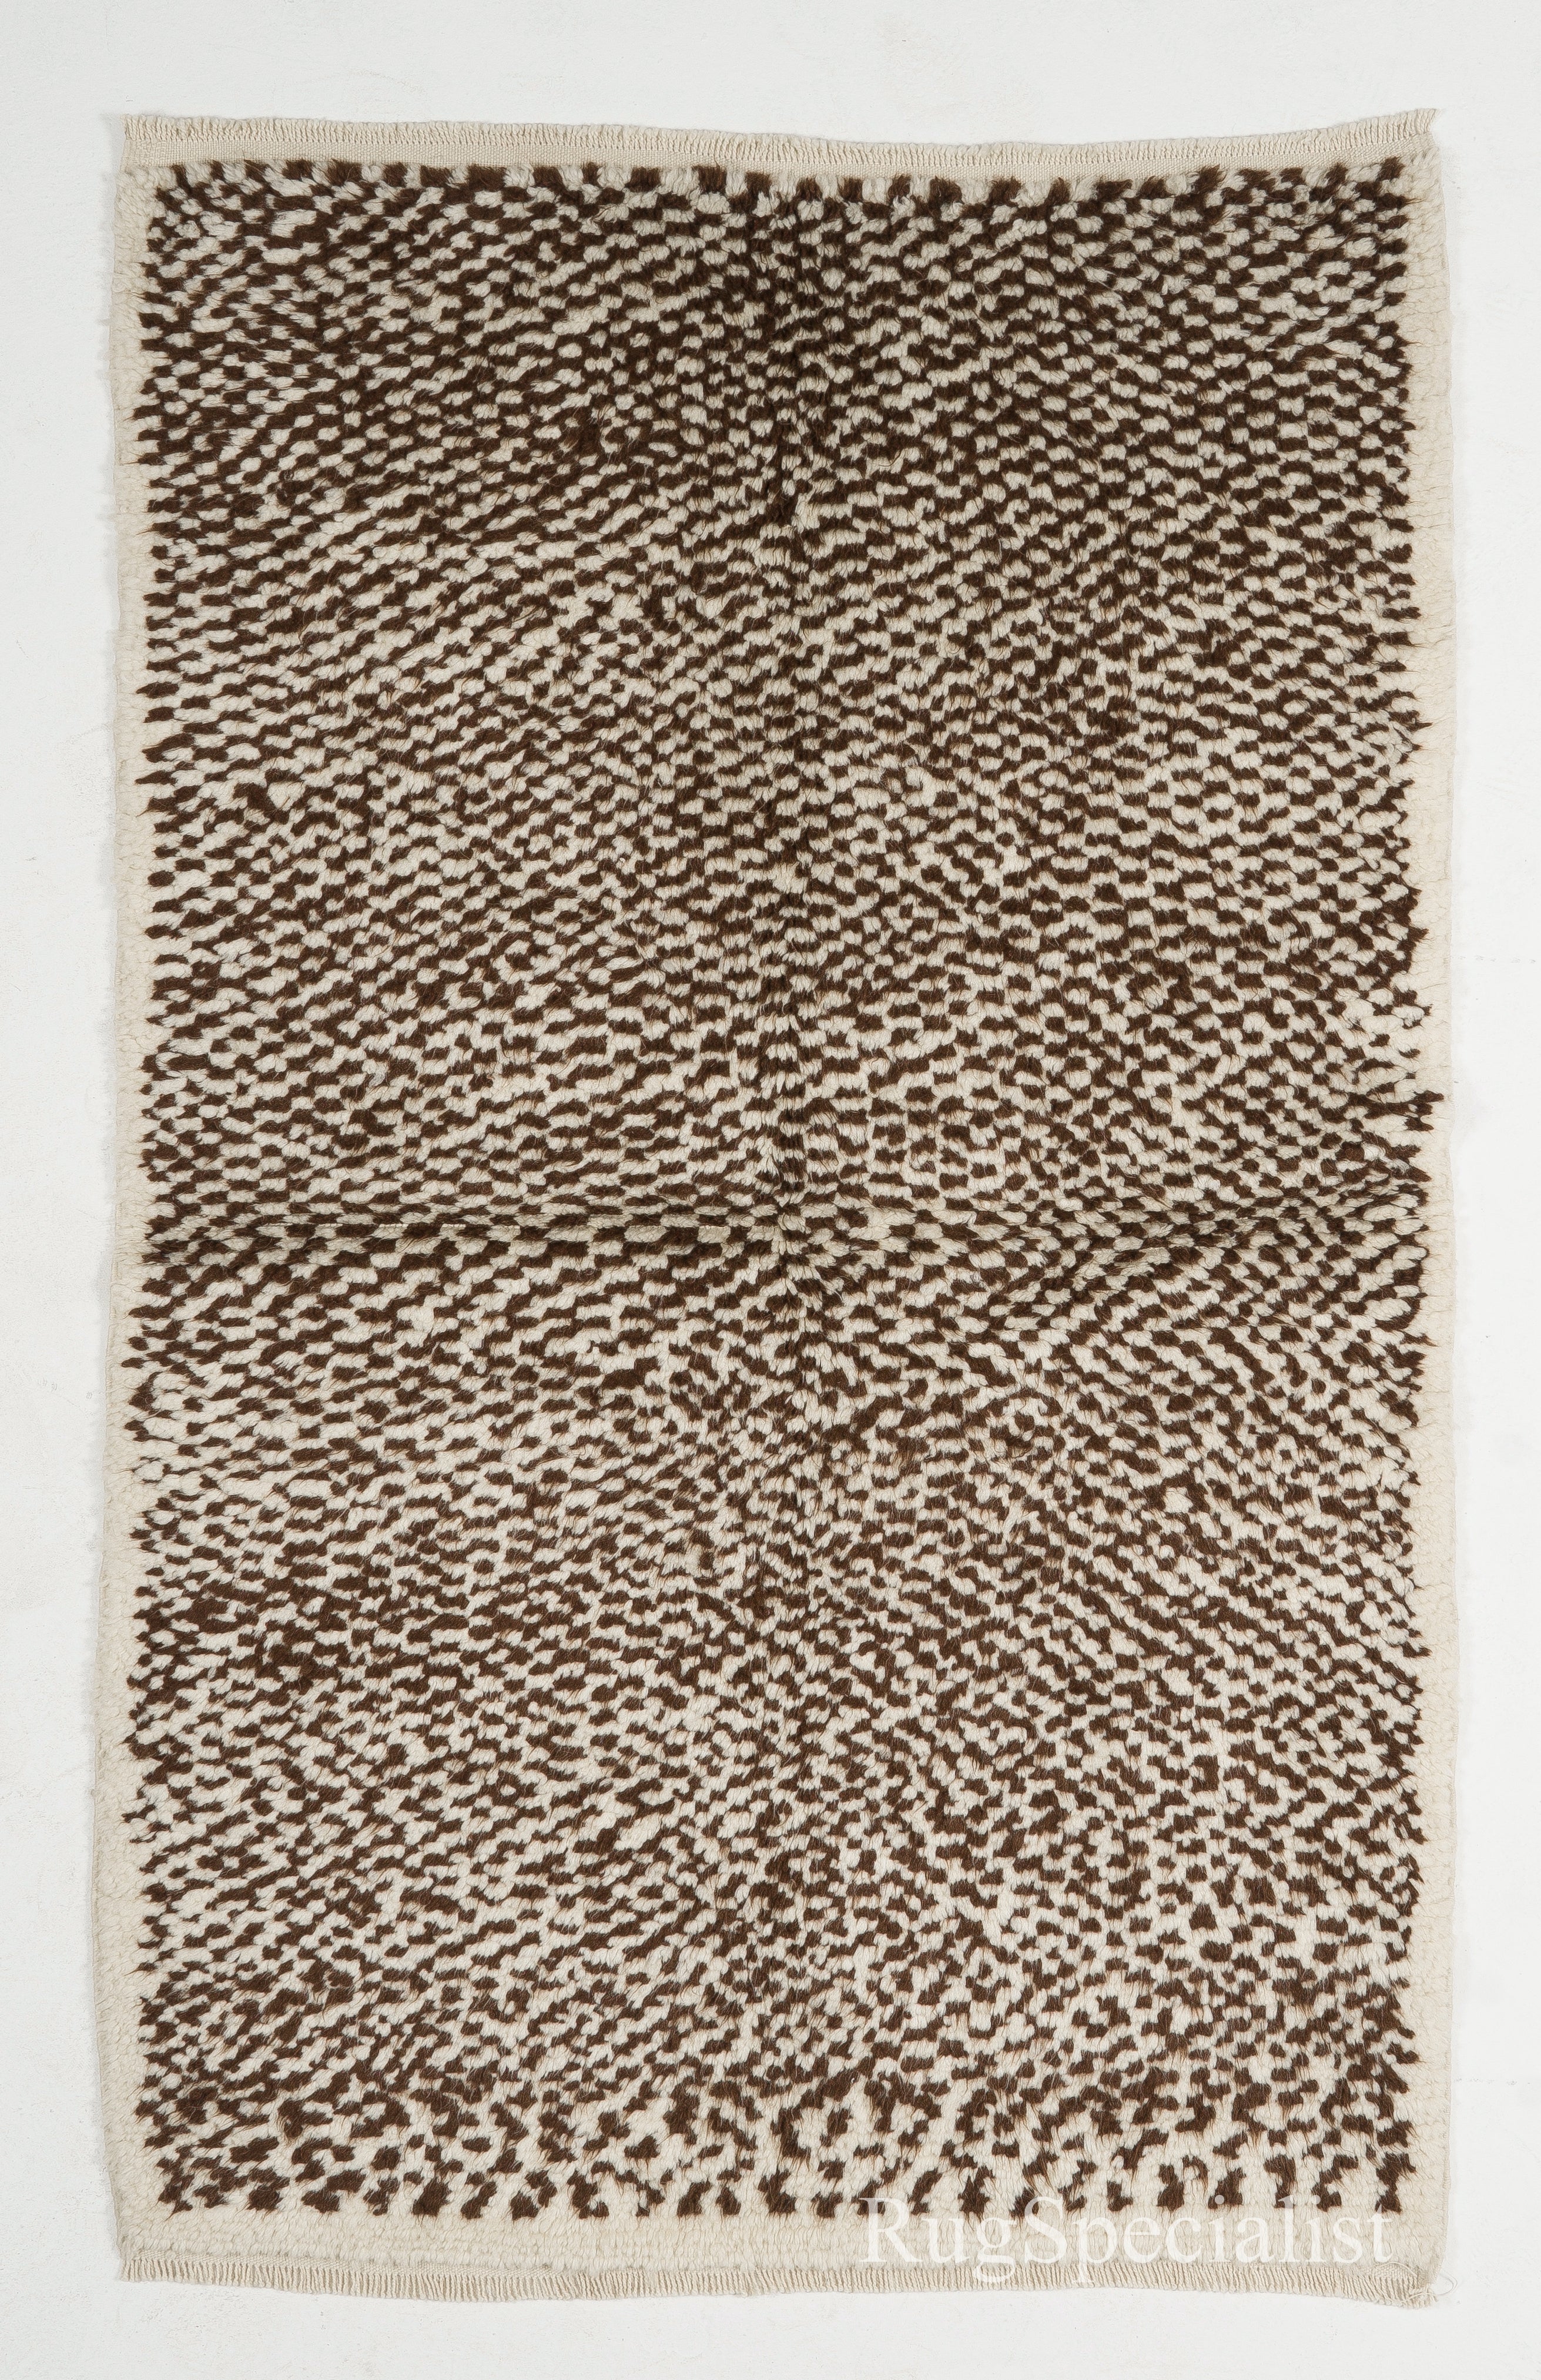 Checkered Tulu Rug, 100% Natural Wool, Cream and Brown, Custom Options Available